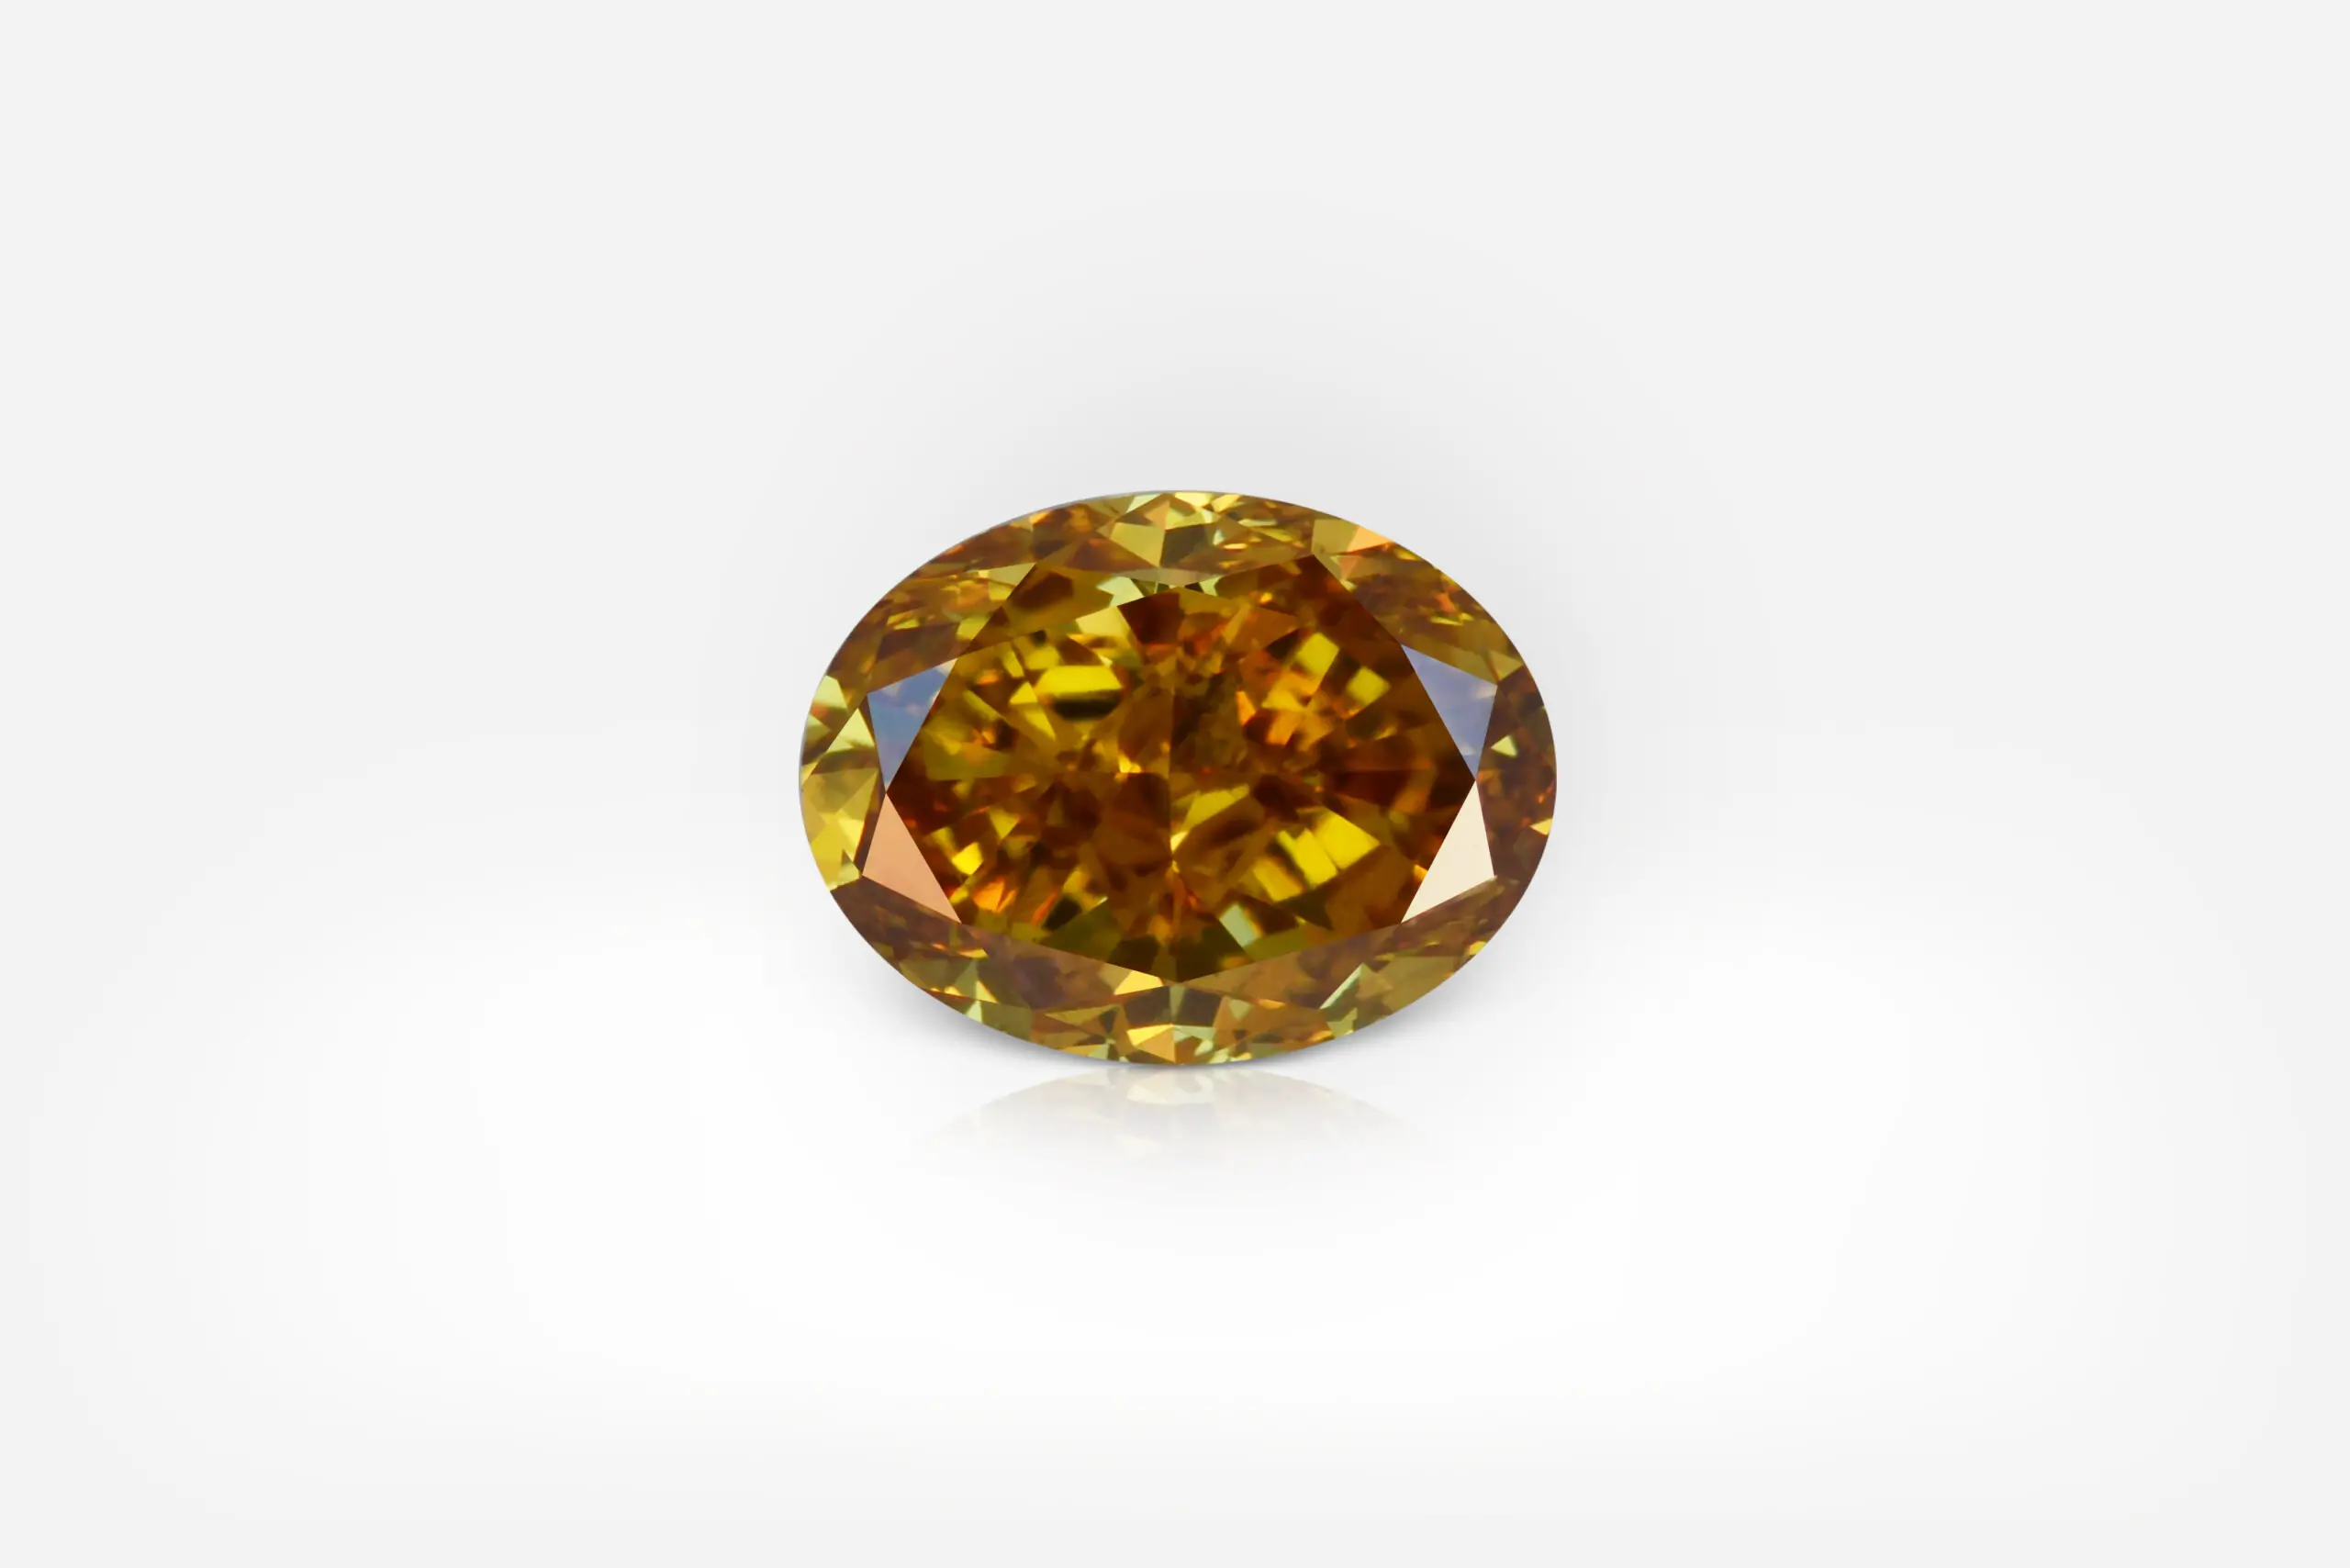 0.71 Carat Fancy Deep Brownish Orangy Yellow SI2 Oval Shape Diamond GIA - picture 1